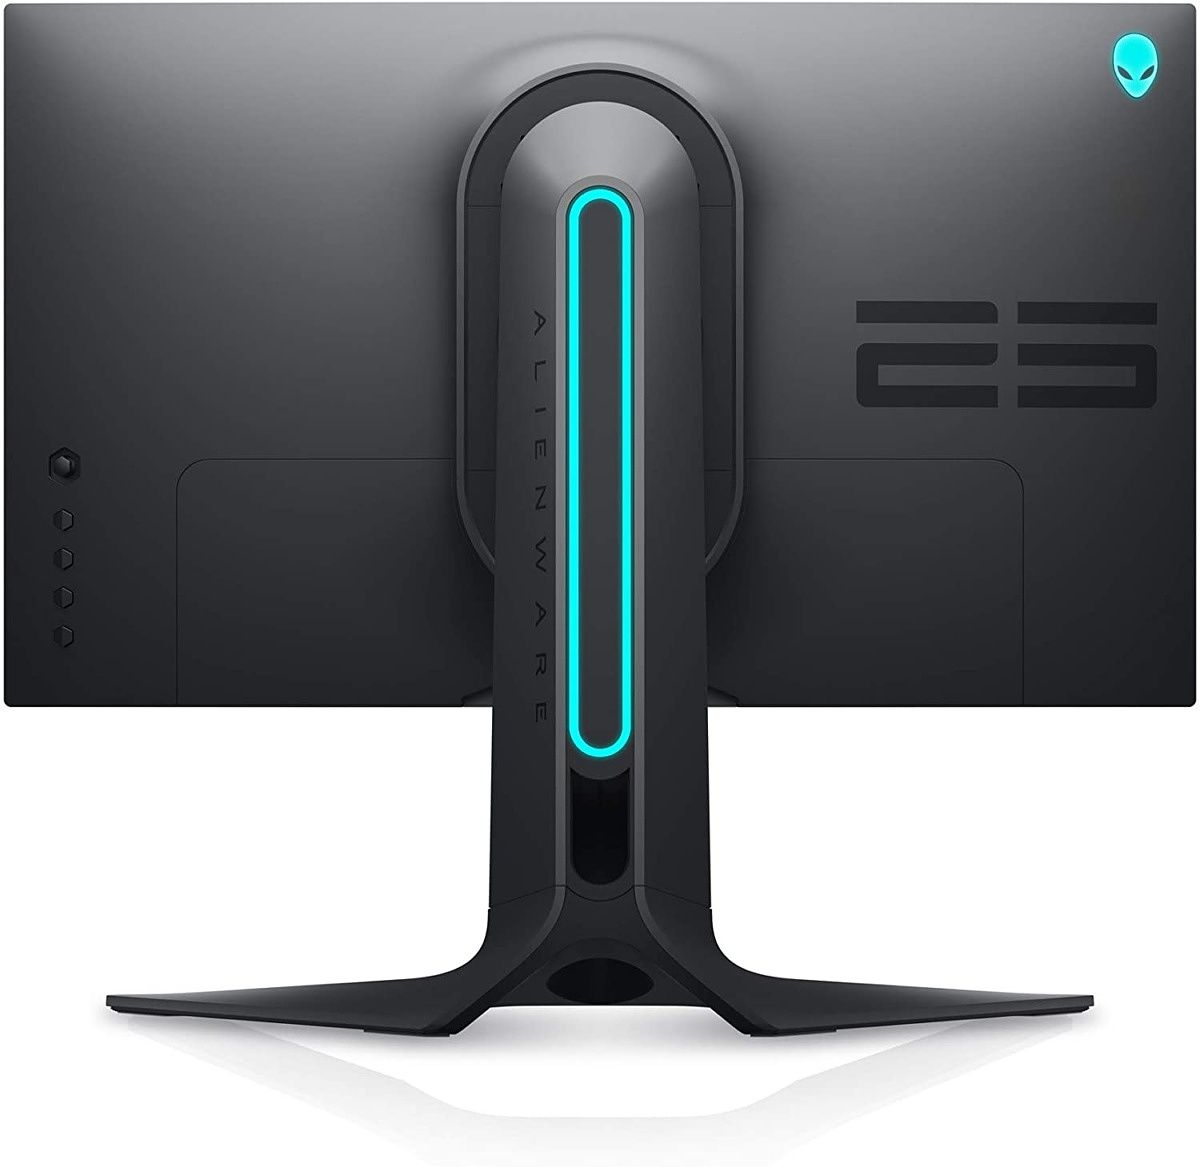 This Alienware monitor comes in at a more-compact 24.5-inches, packing a 240Hz refresh rate. It's a perfect monitor for popular esports titles, and it's at an all-time low price right now on Amazon.